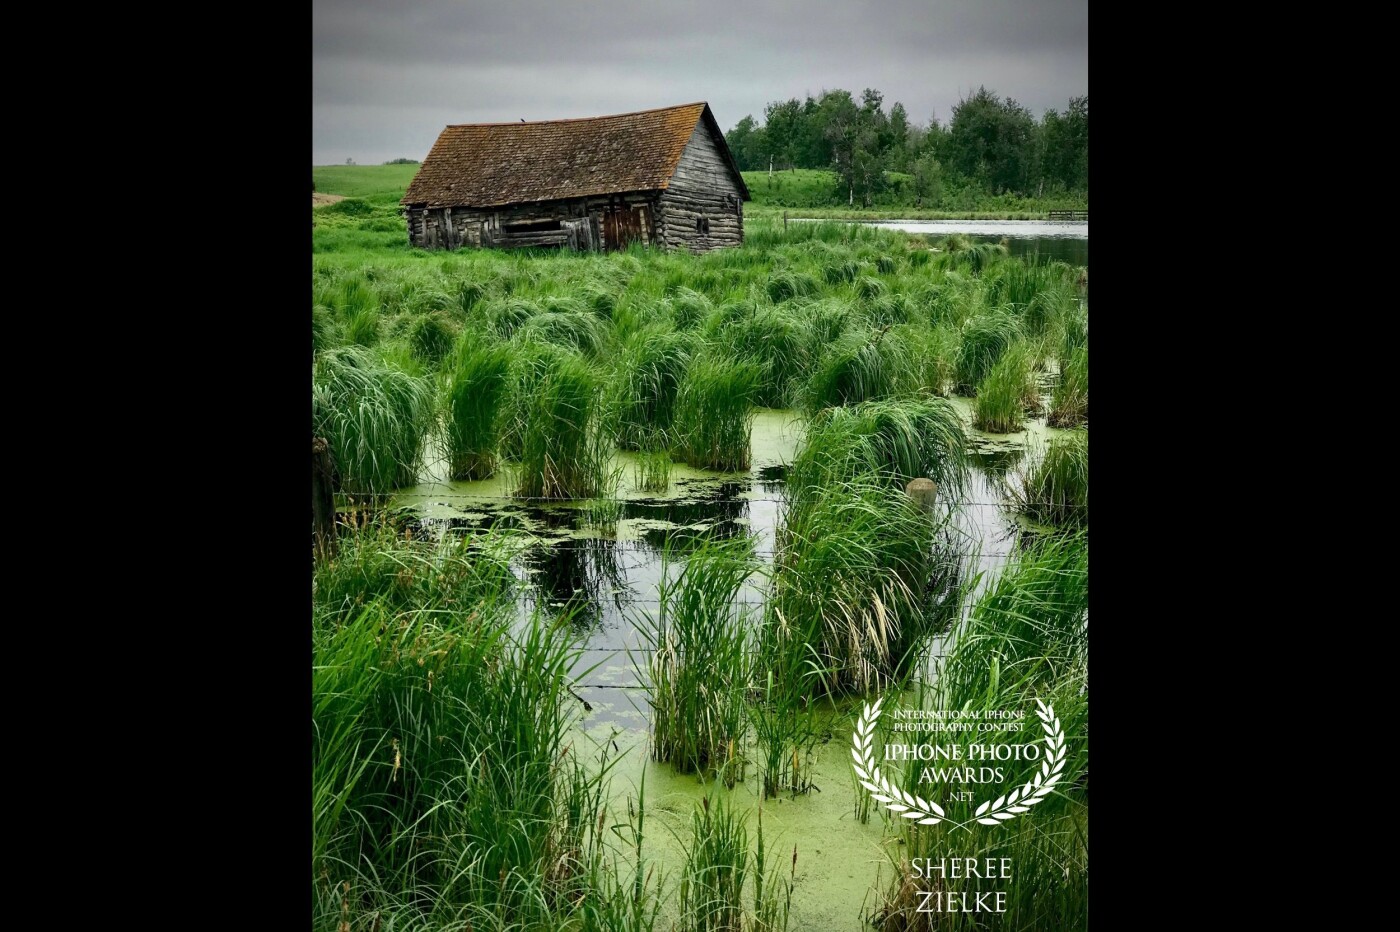 I found this barn near one of our national parks. It was so handsome nestled into quiet water and lush greenery. The low light made the greens even more vibrant. 